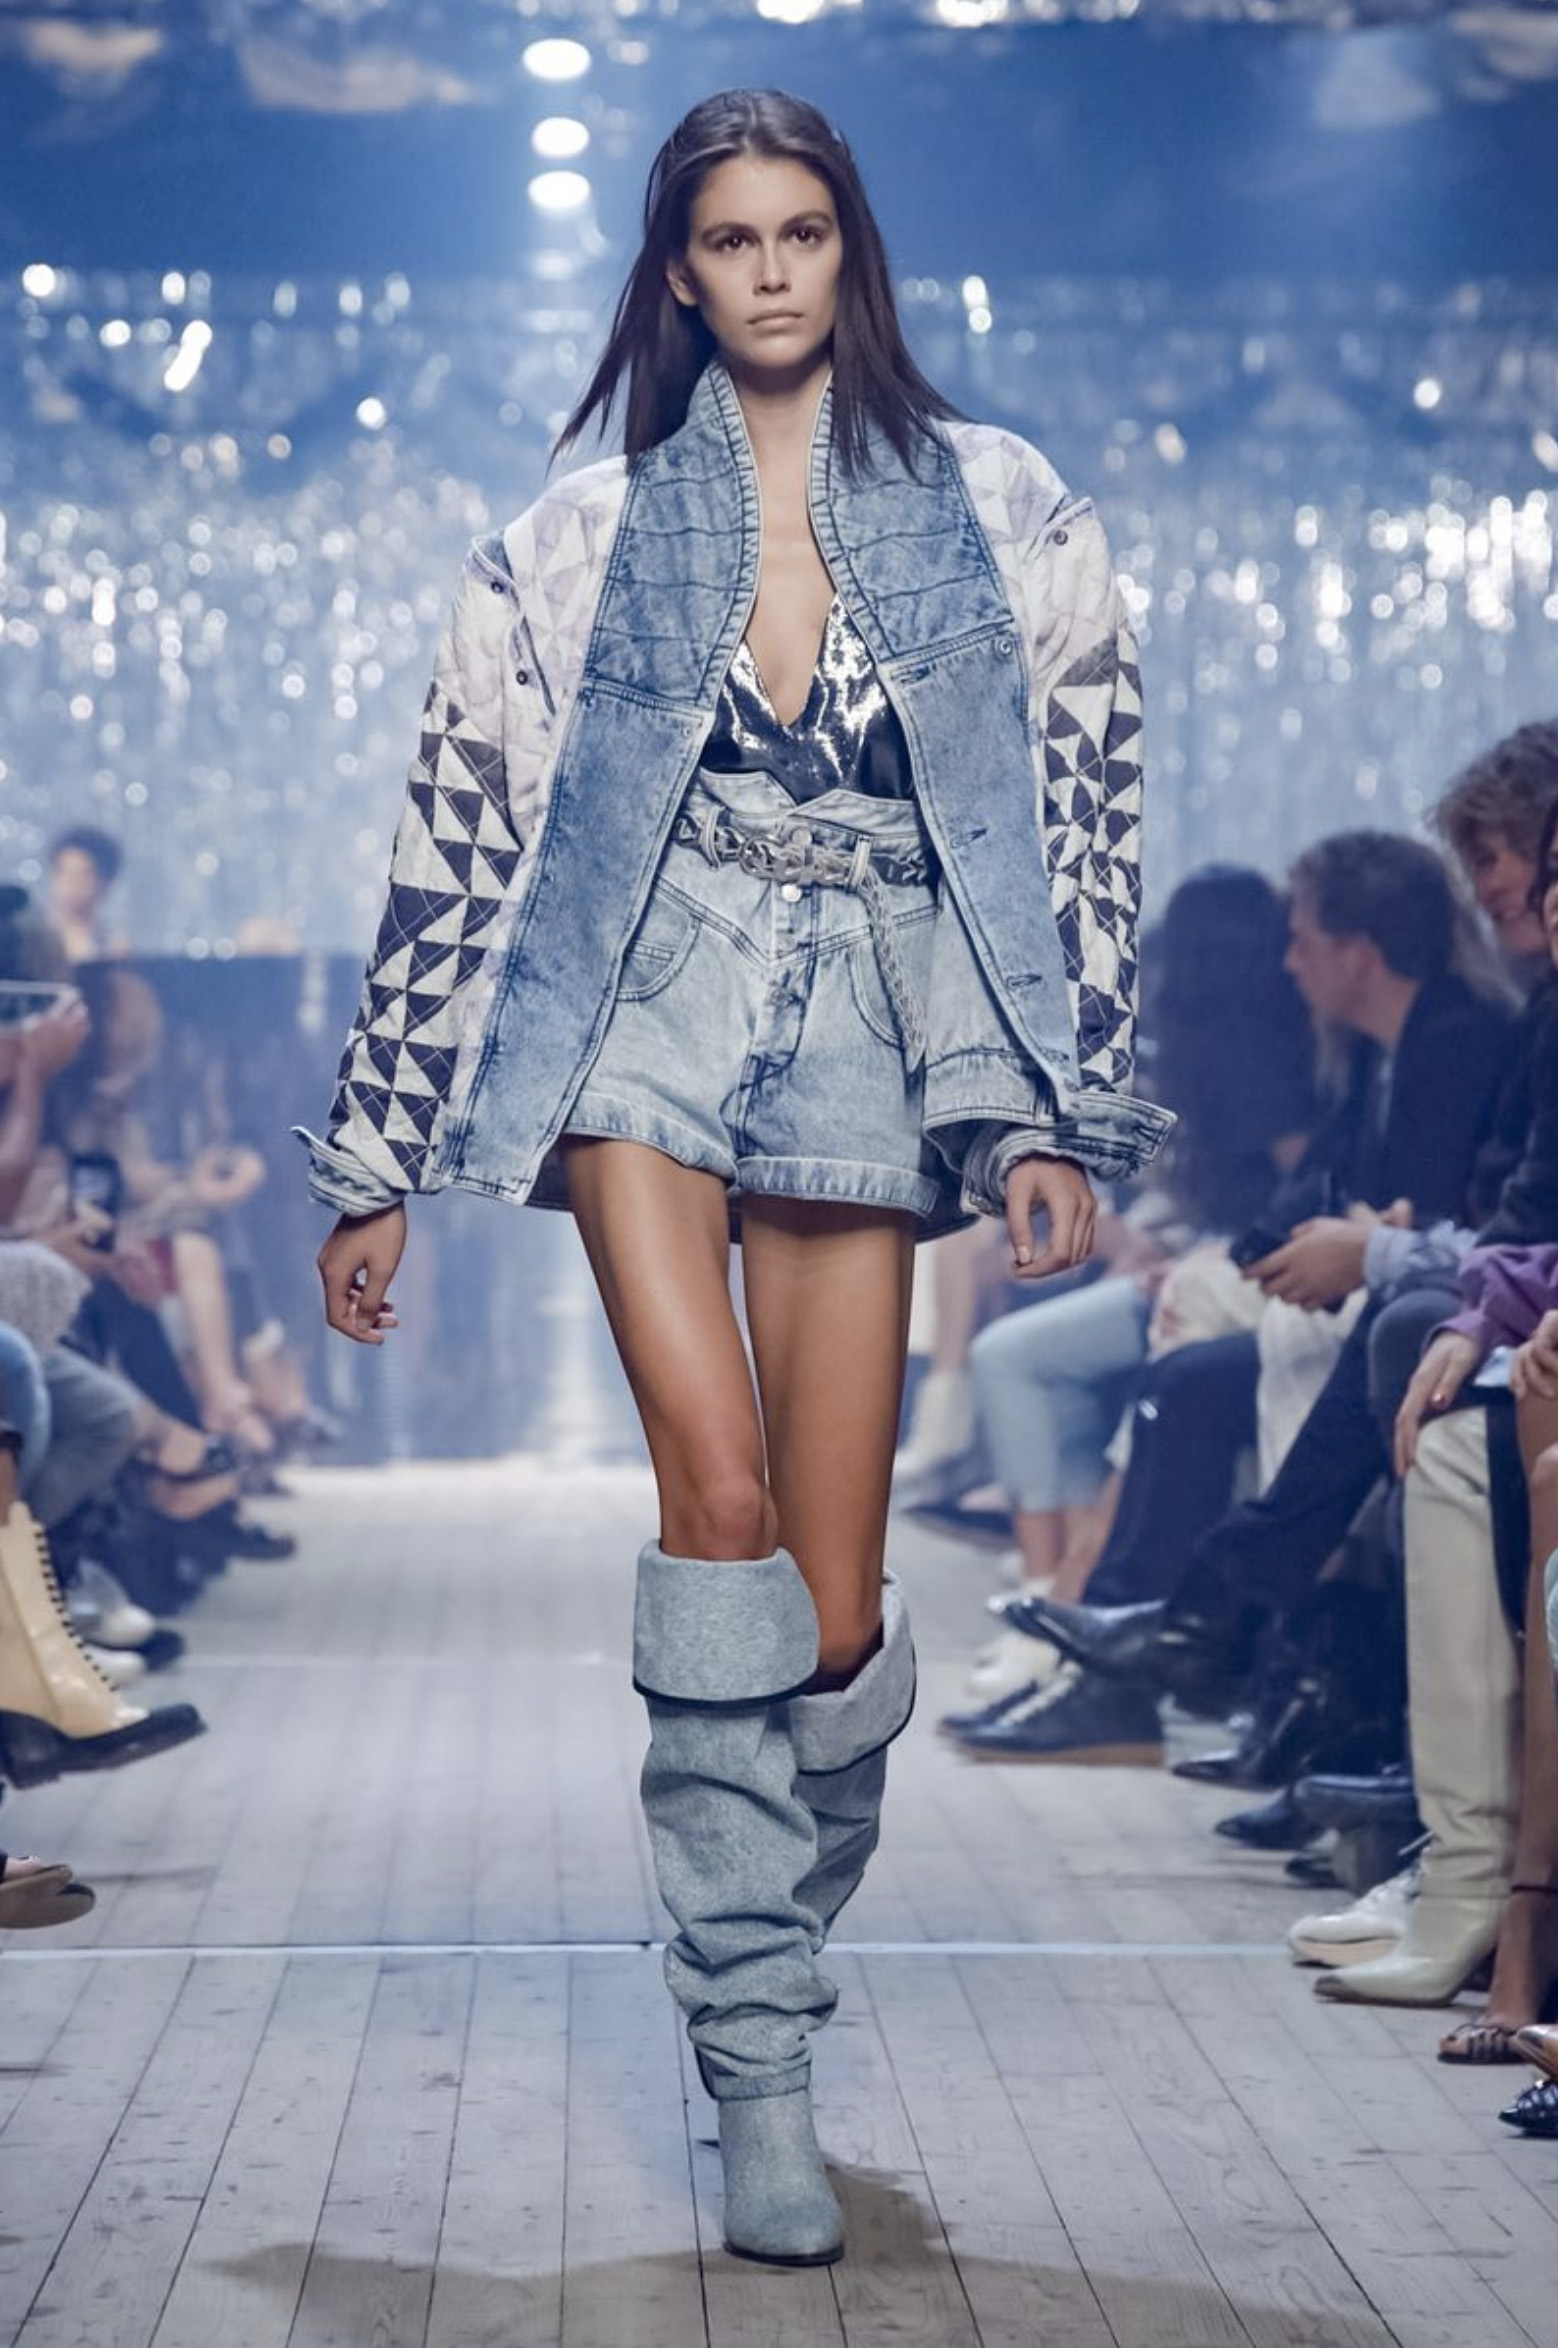 Kaia Gerber wore best looks in the Isabel Marant show